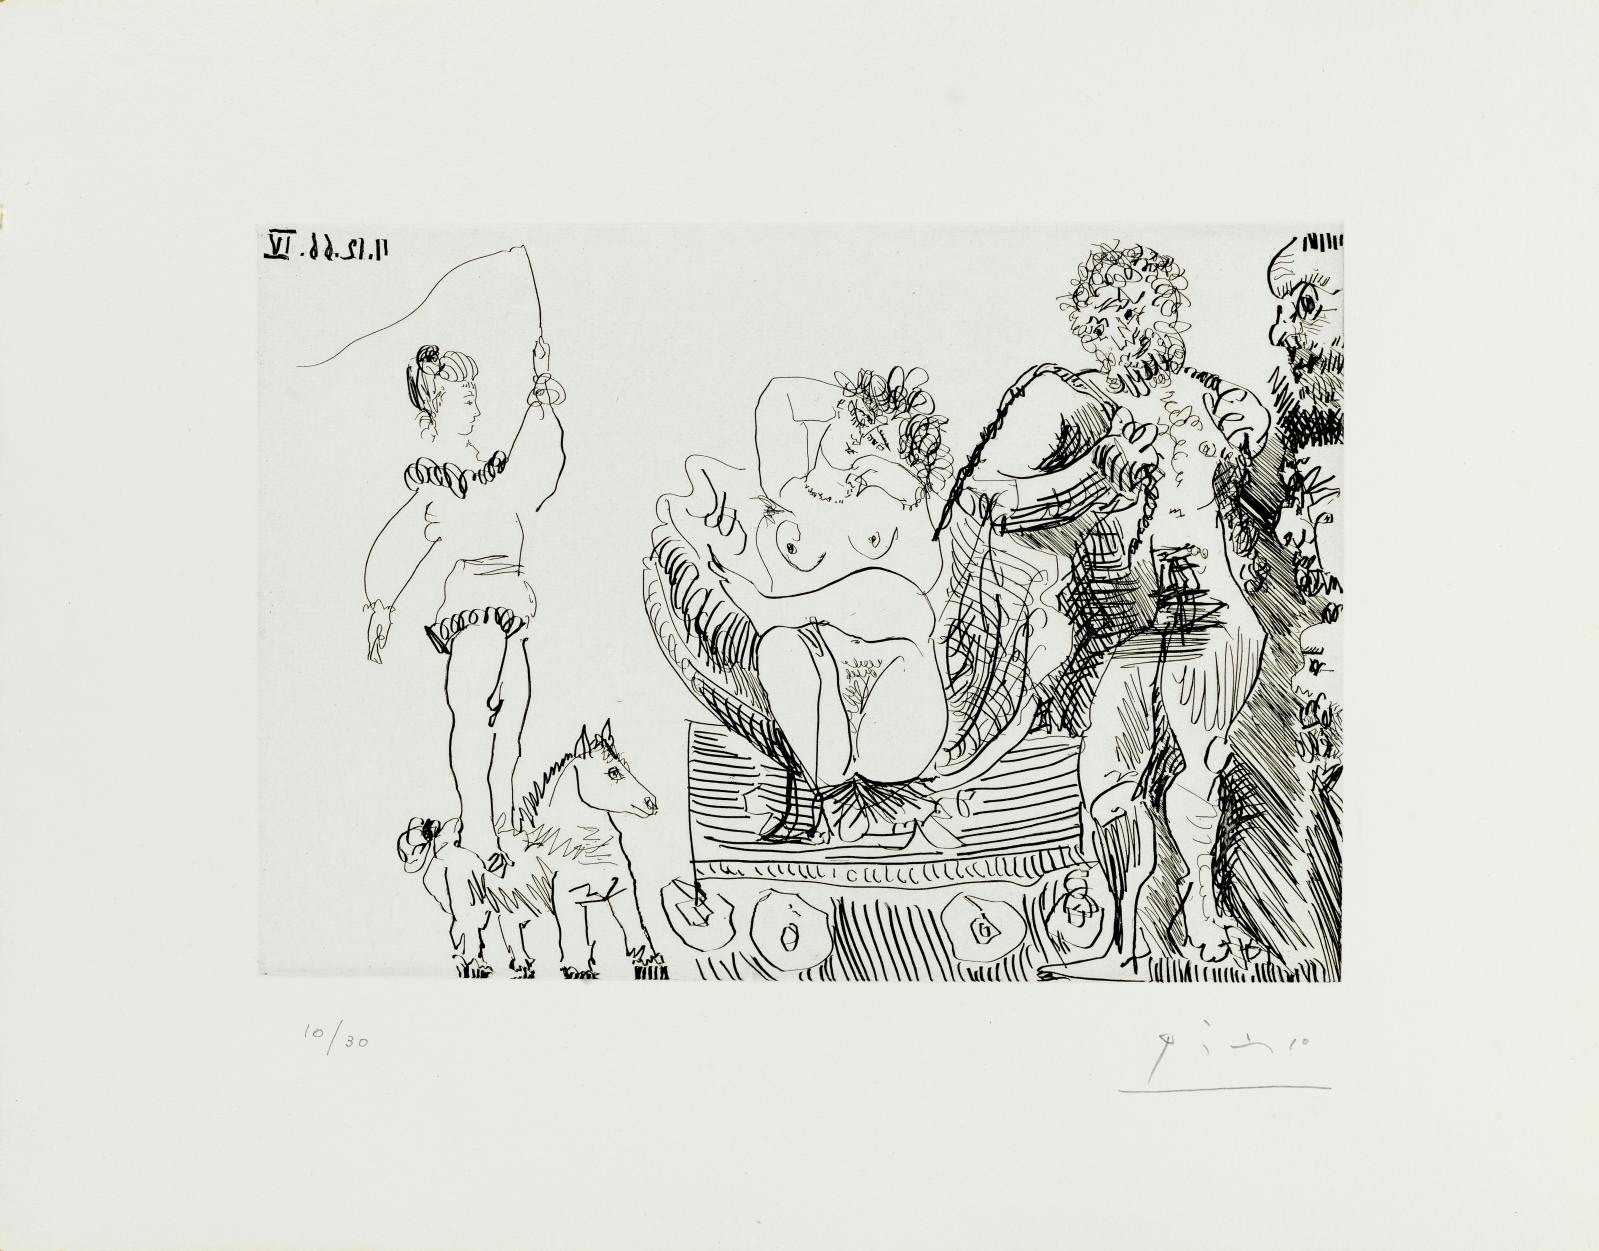 Fernand Crommelynck (1885-1970) and Pablo Picasso (1881-1973), Le Cocu magnifique, complete set in the book of 12 wide-margin etchings on 